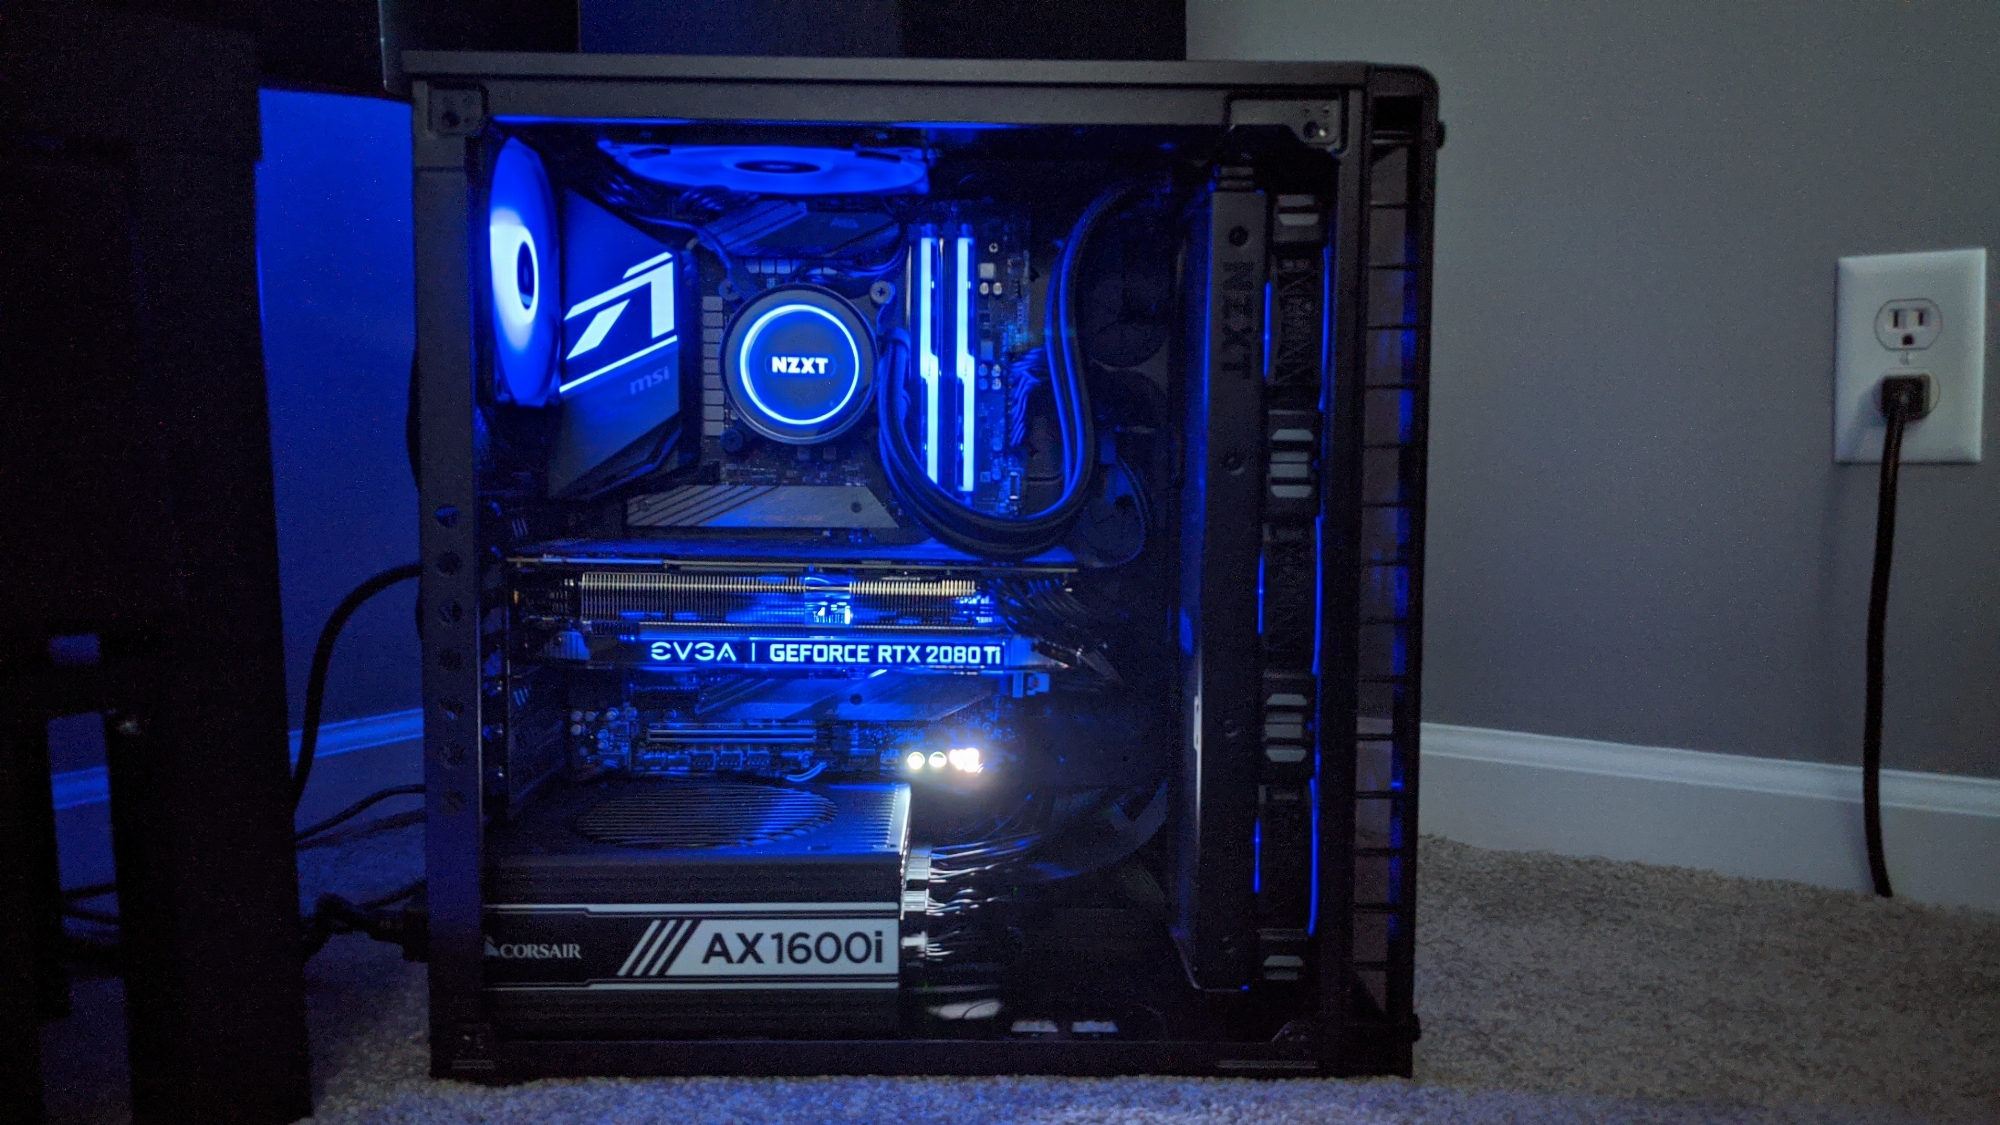 My New 2020 Gaming PC Build: Intel i9 10900k and RTX 2080 ti! 